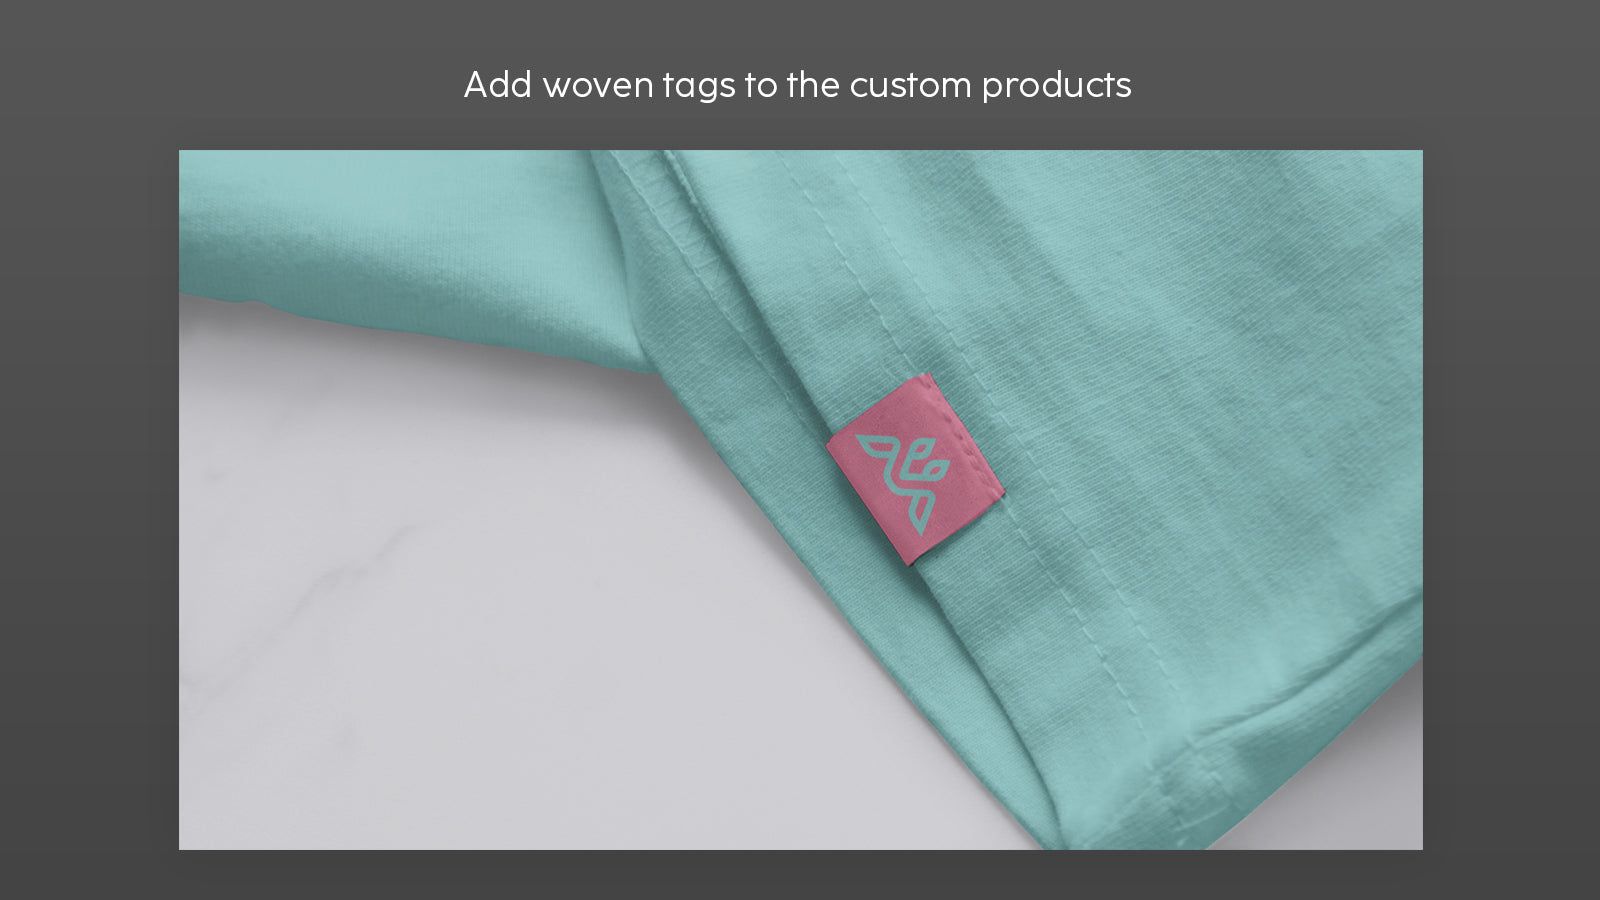 Add woven tags to the custom products